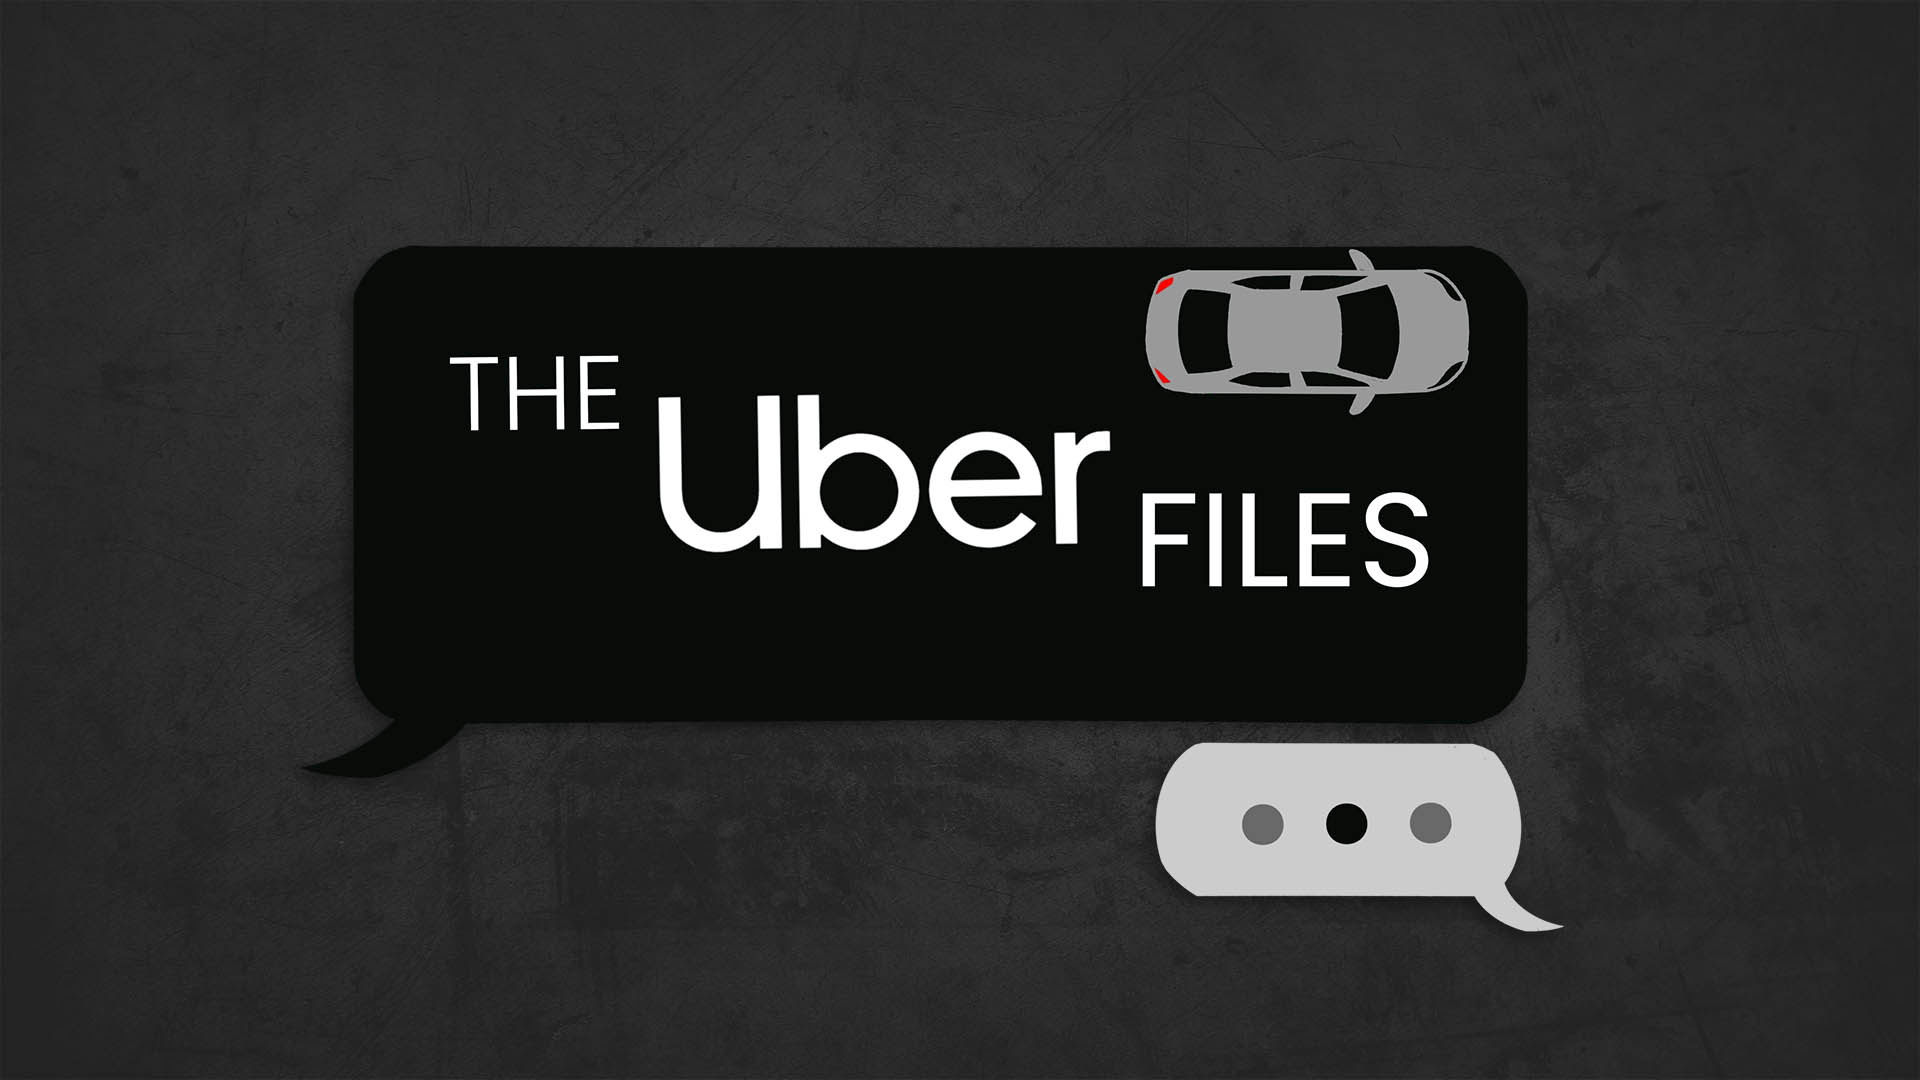 About the Uber Files investigation - ICIJ